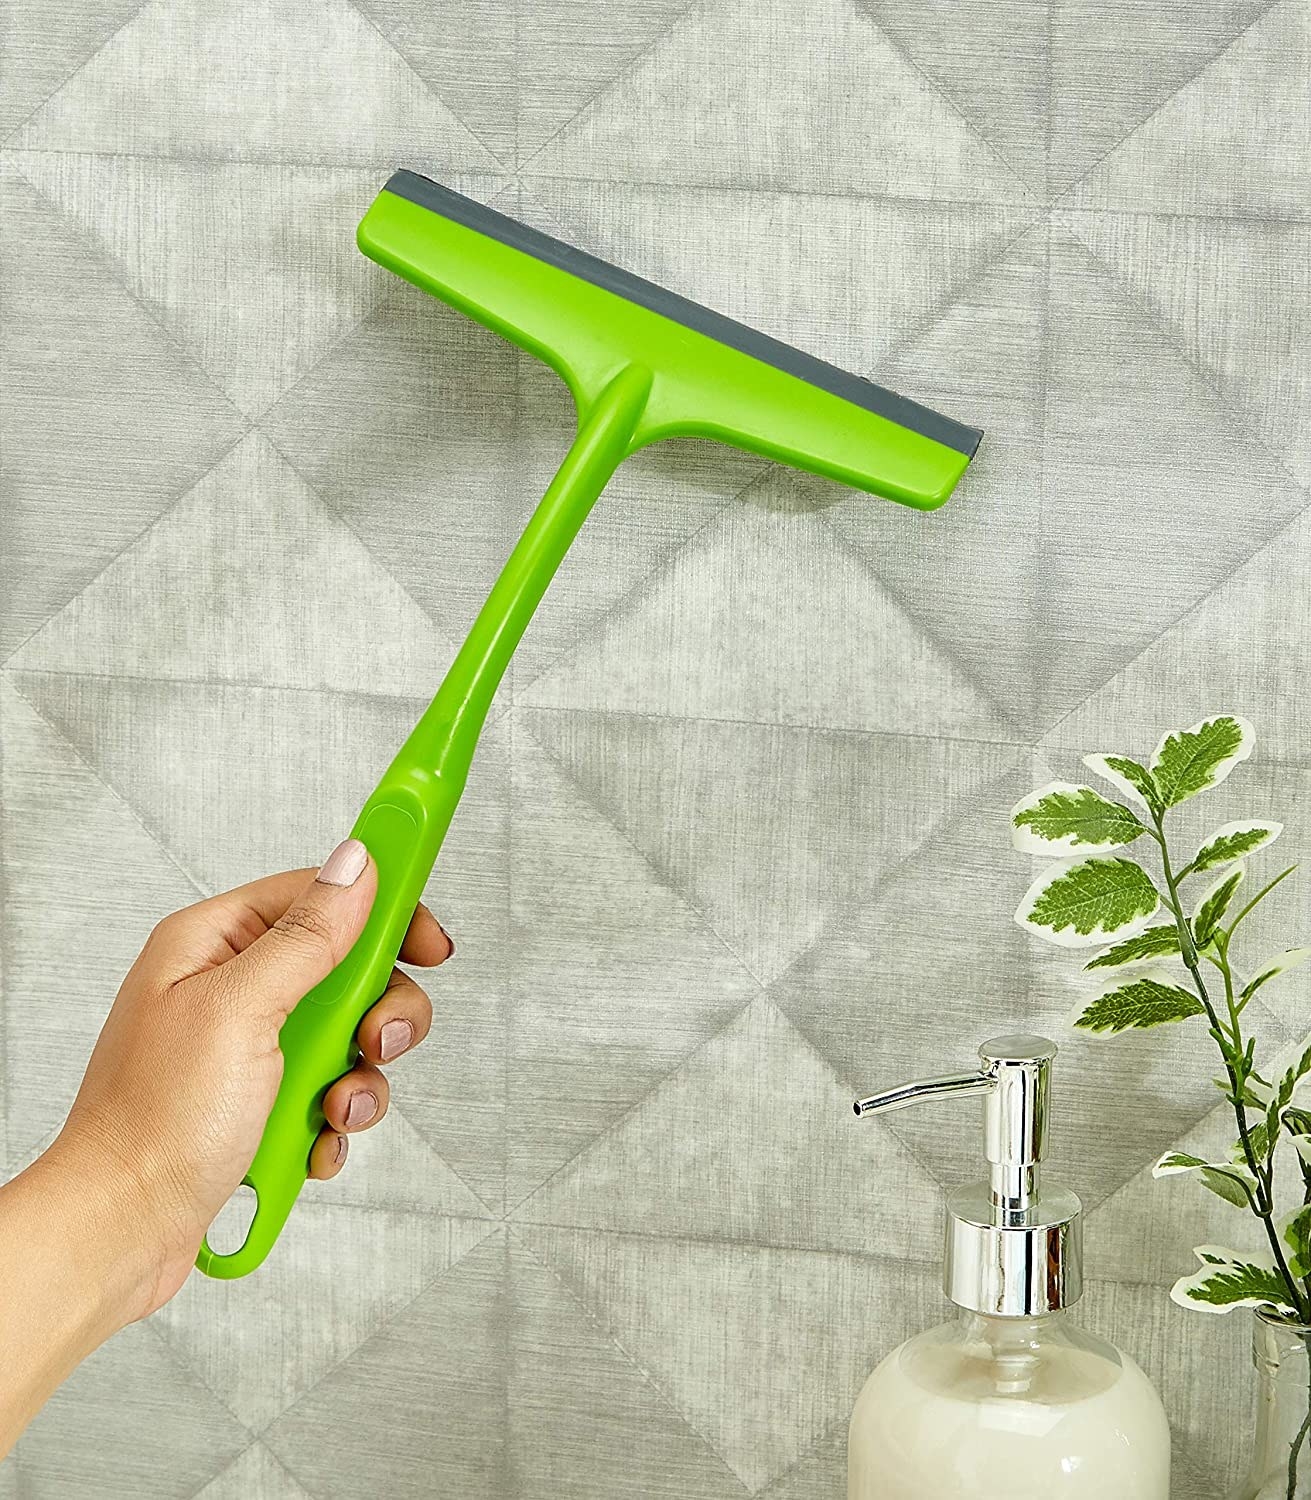 A person using the squeegee to clean a wall